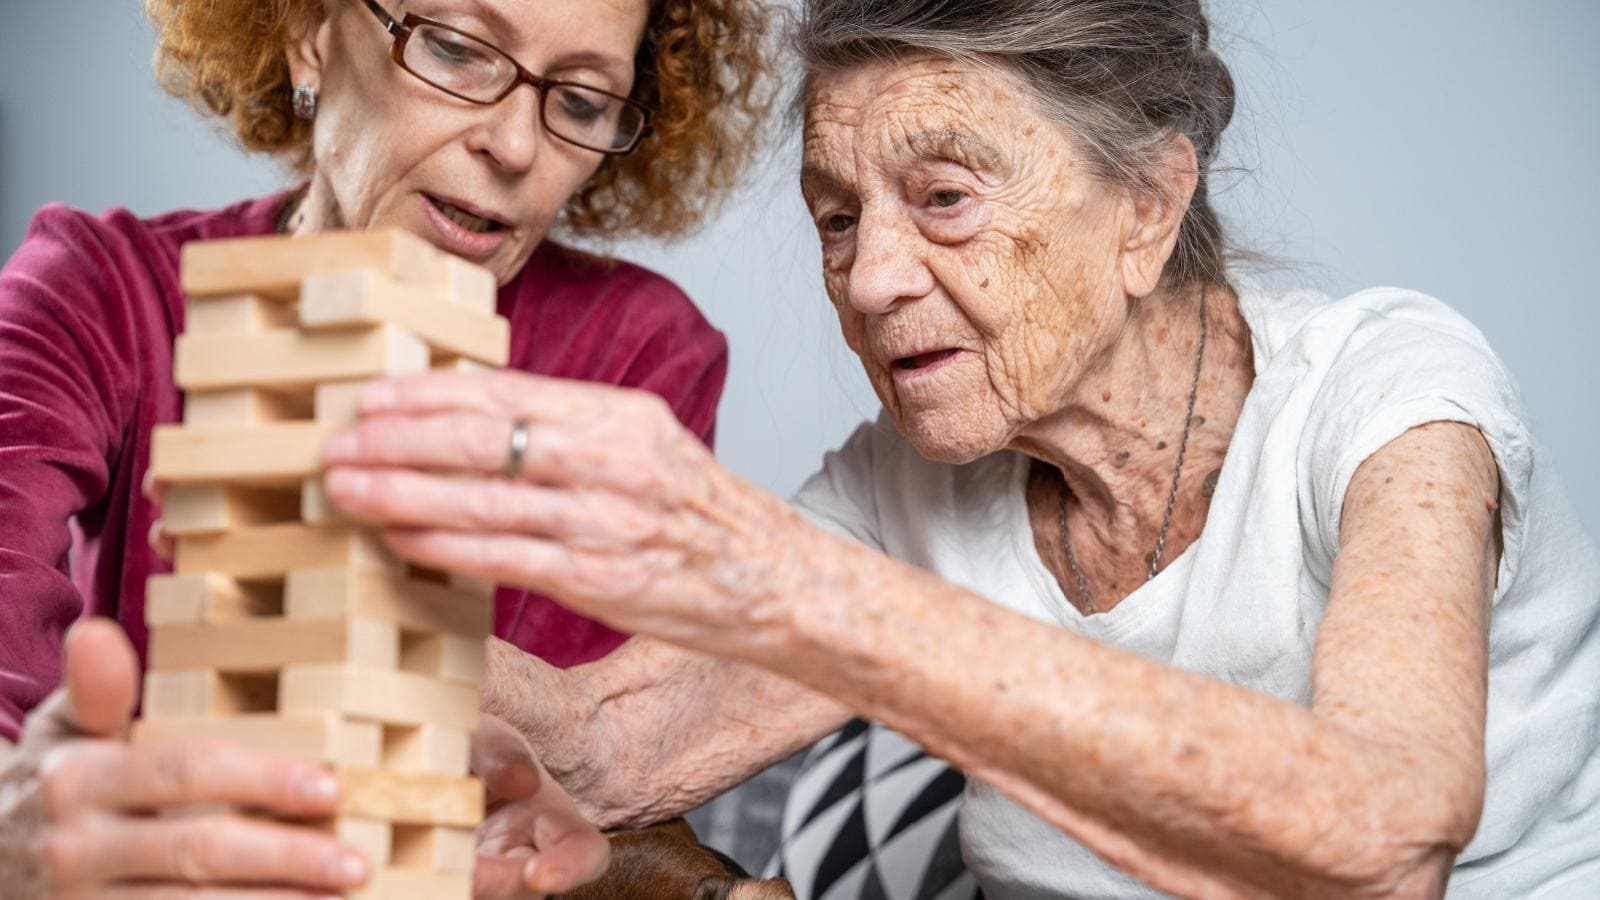 Old woman and a social worker playing jenga as a dementia therapy